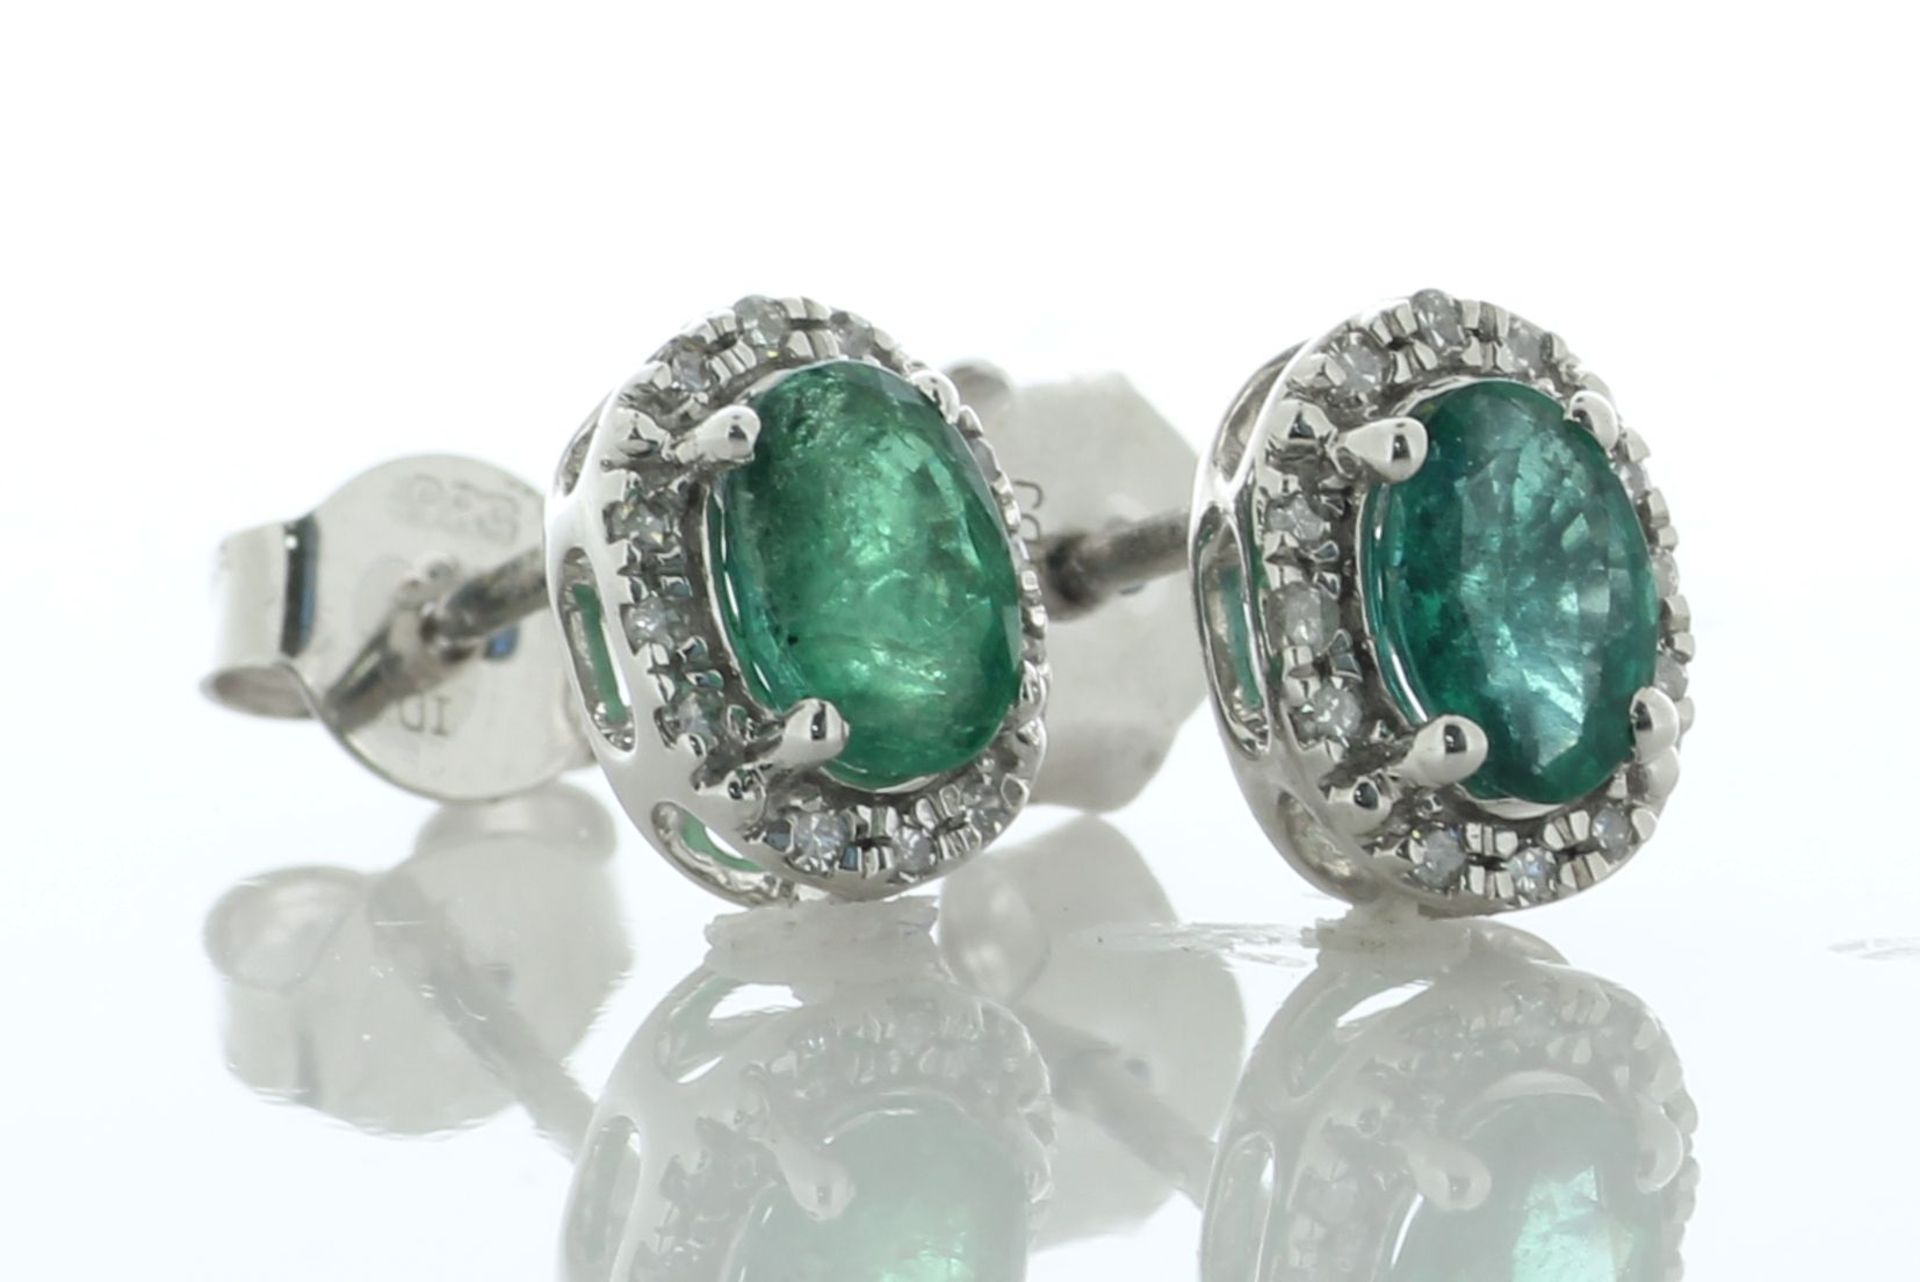 14ct White Gold Oval Cut Emerald And Diamond Stud Earring 0.10 Carats - Valued By IDI £2,225.00 - - Image 3 of 5